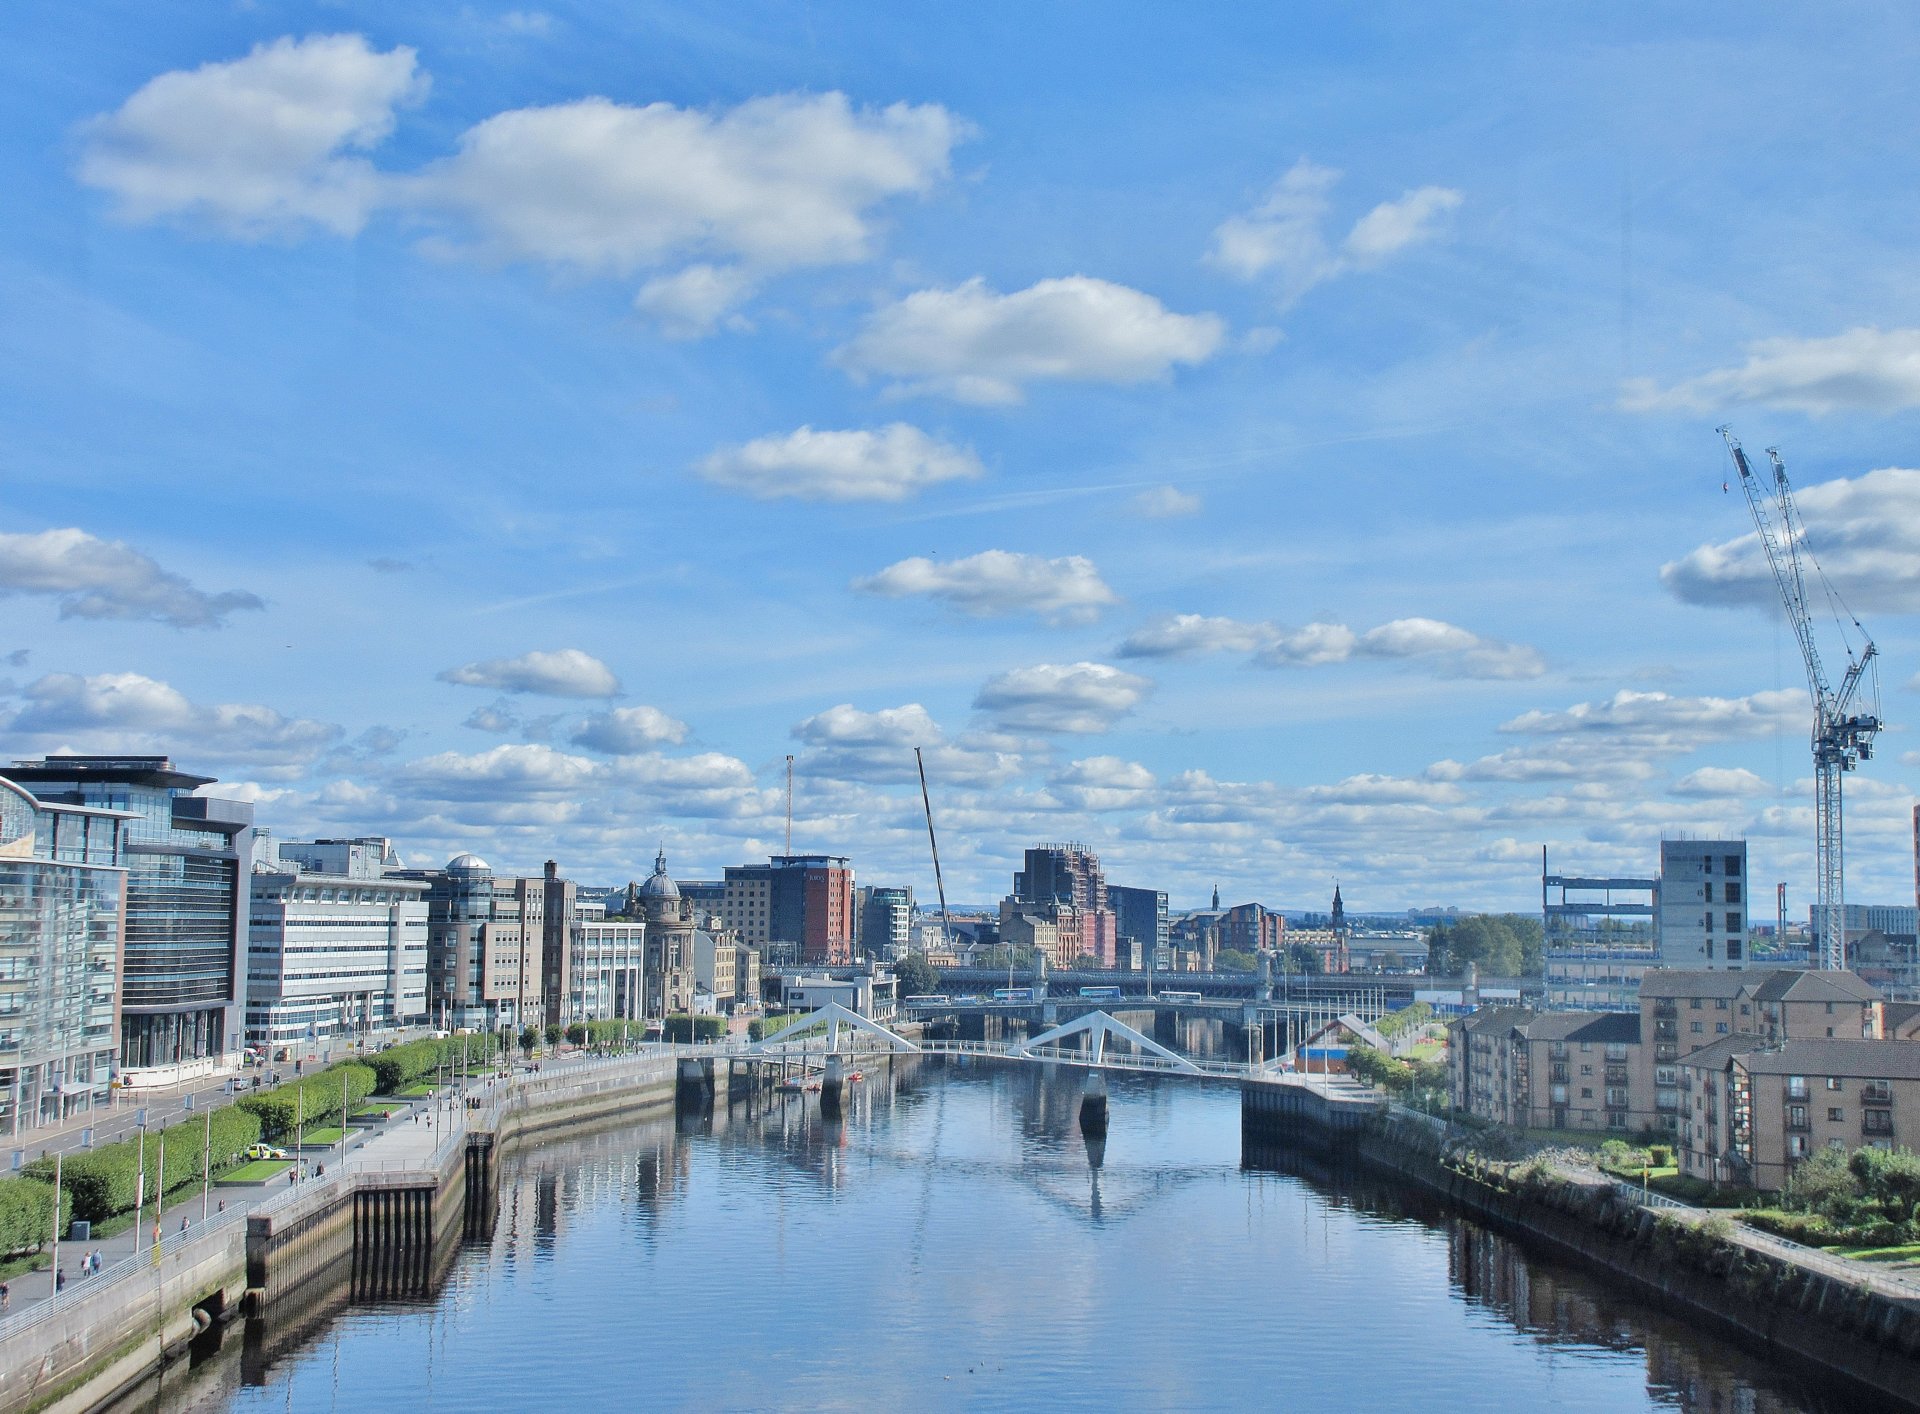 Glasgow and the River Clyde